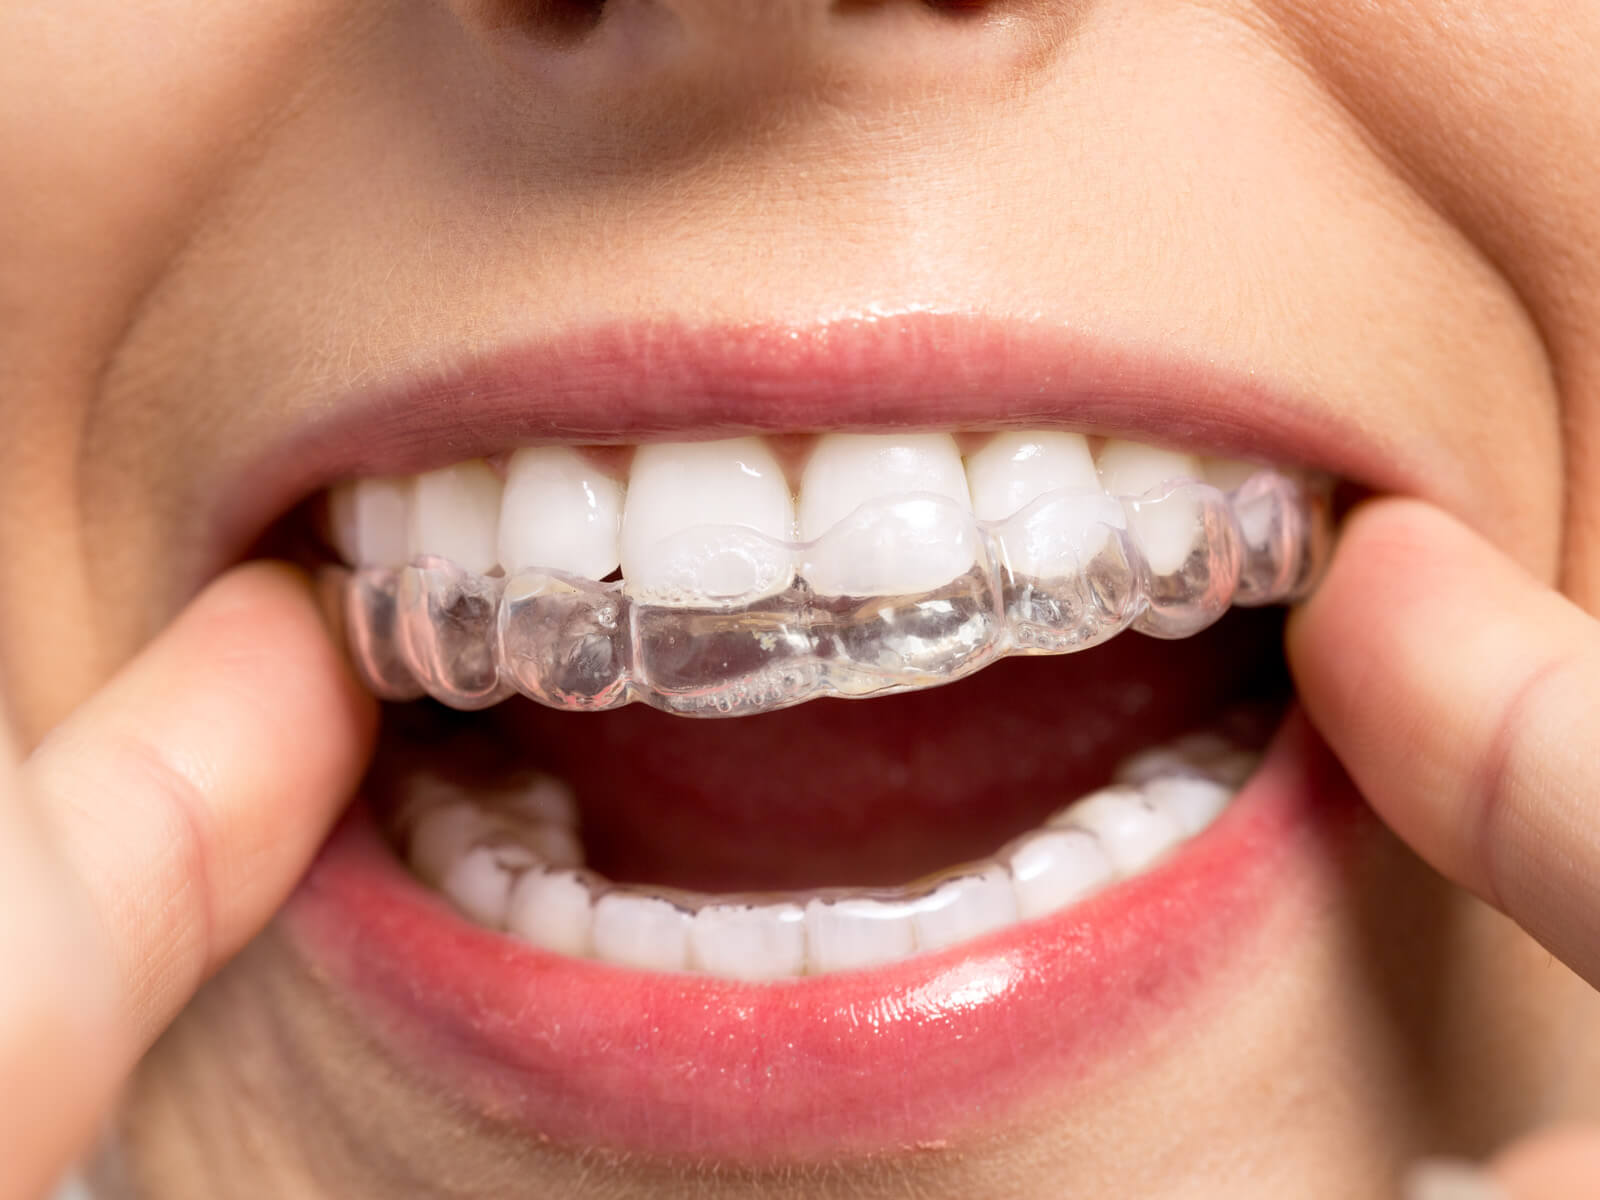 Can you rotate teeth with Invisalign?